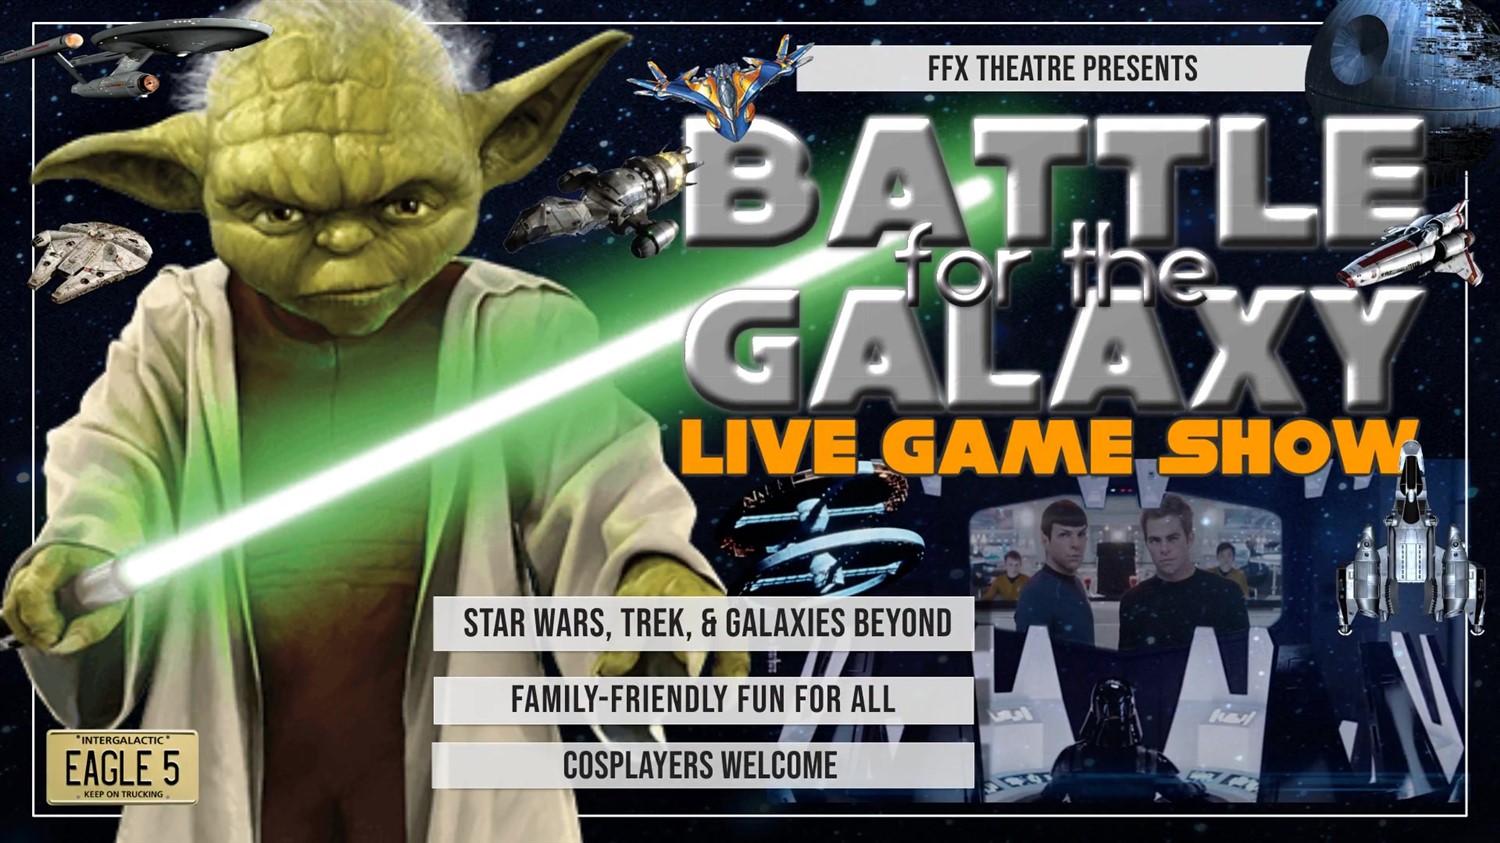 Battle for the Galaxy: Live Game Show  on Feb 26, 19:00@FFX Theatre - Buy tickets and Get information on Family Fun Xperience tickets.ffxshow.org